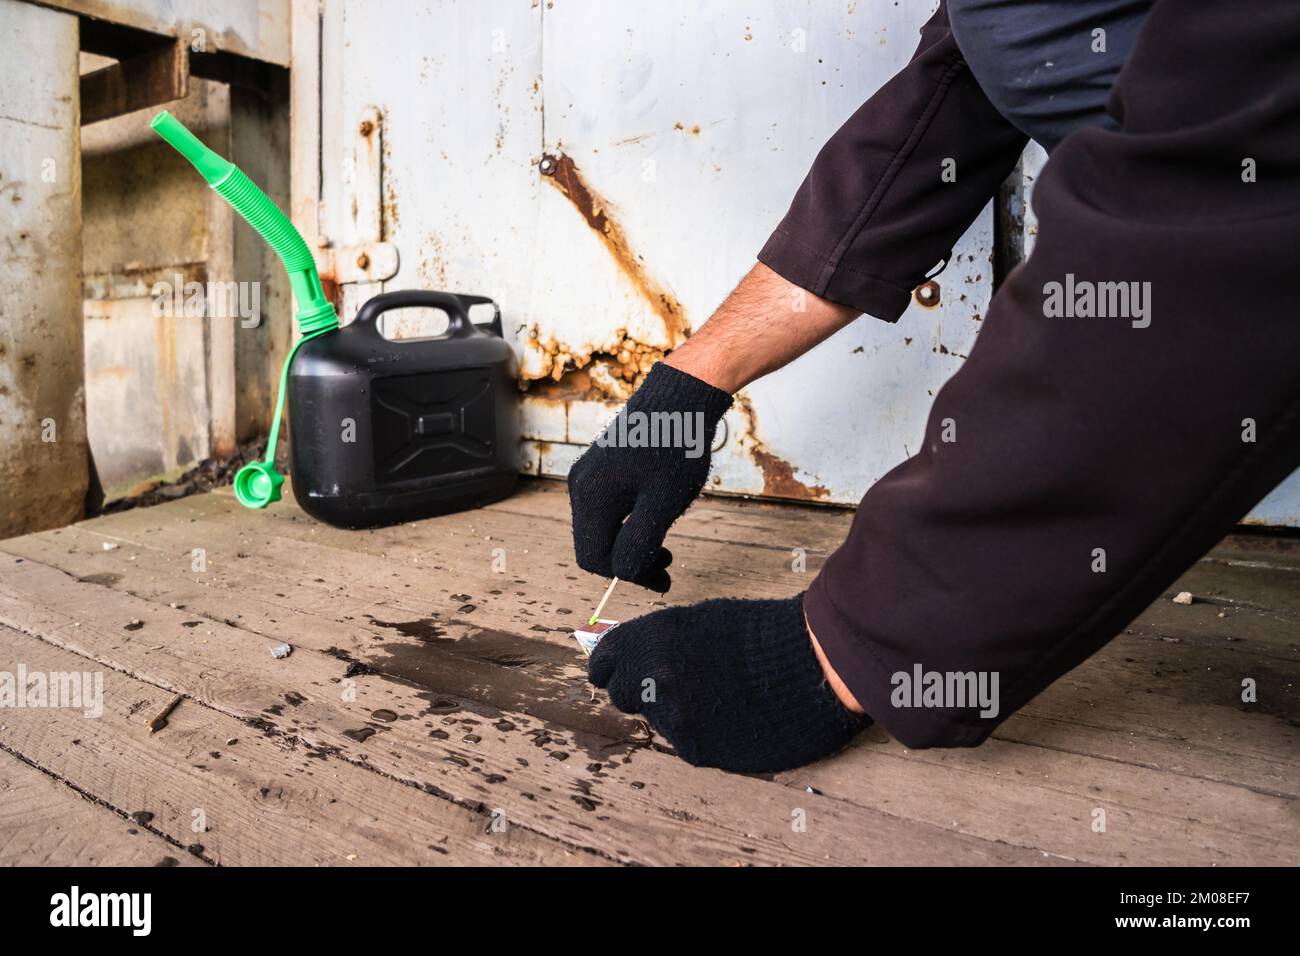 Arsonists symbolically setting fire to a house Stock Photo